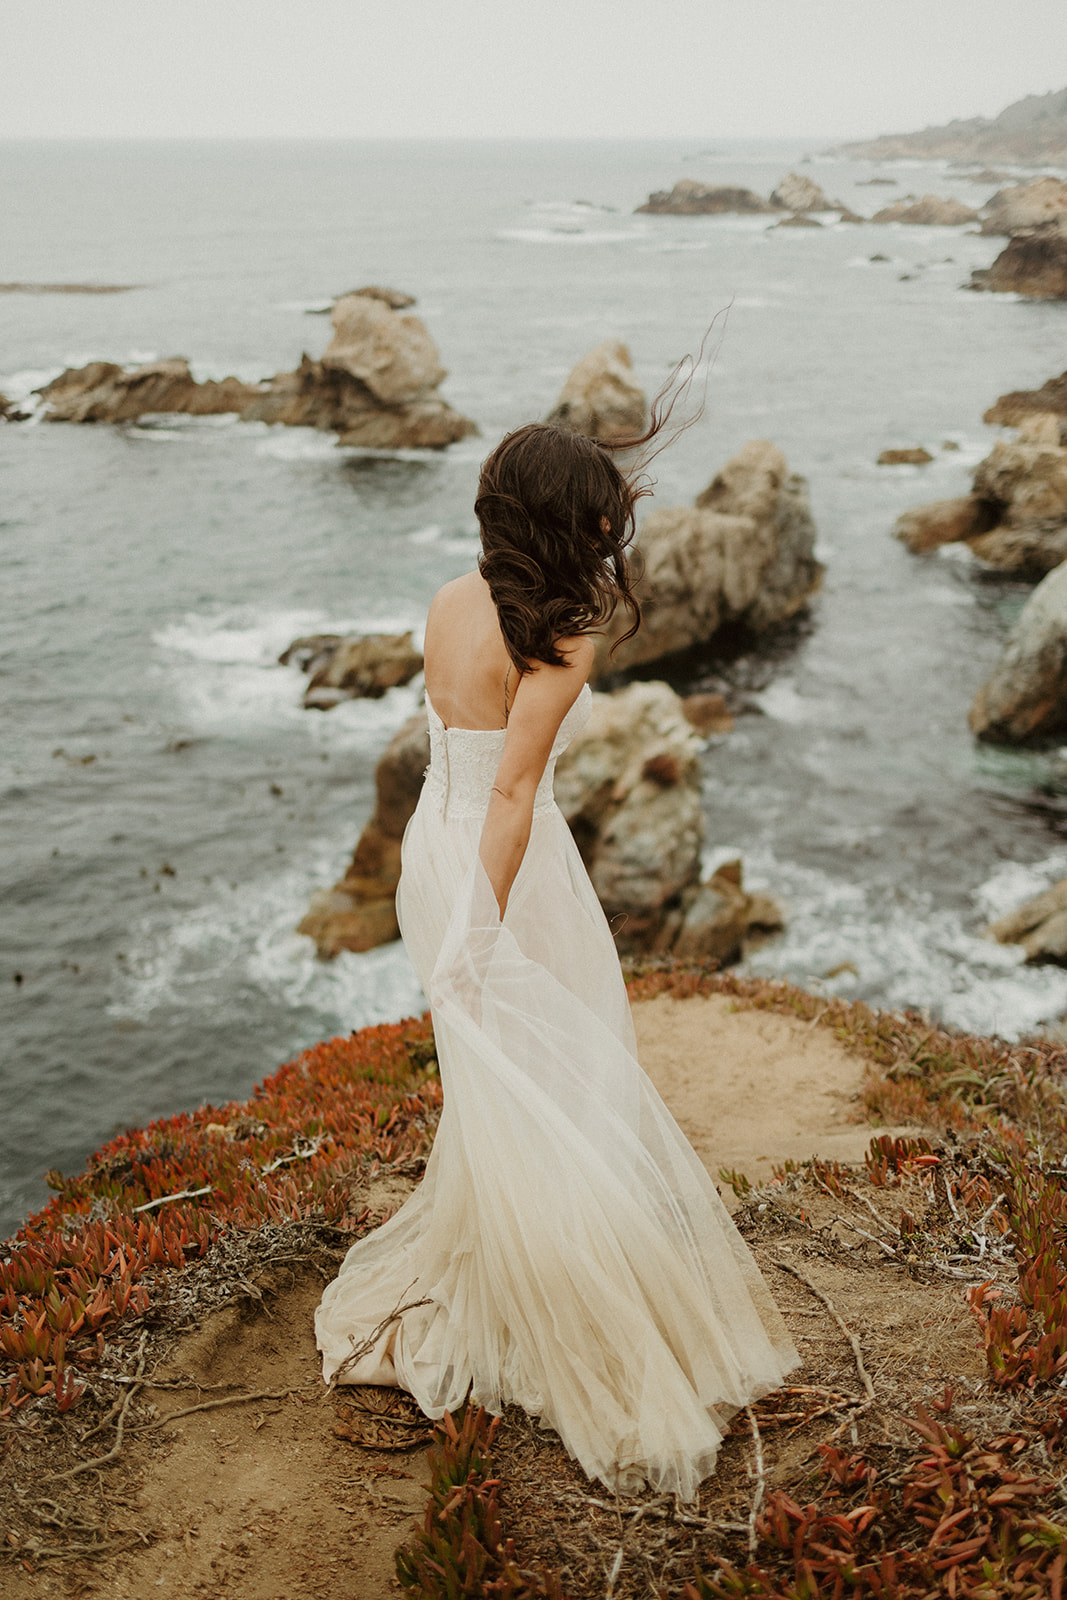 the bride standing with her dress blowing in the wind